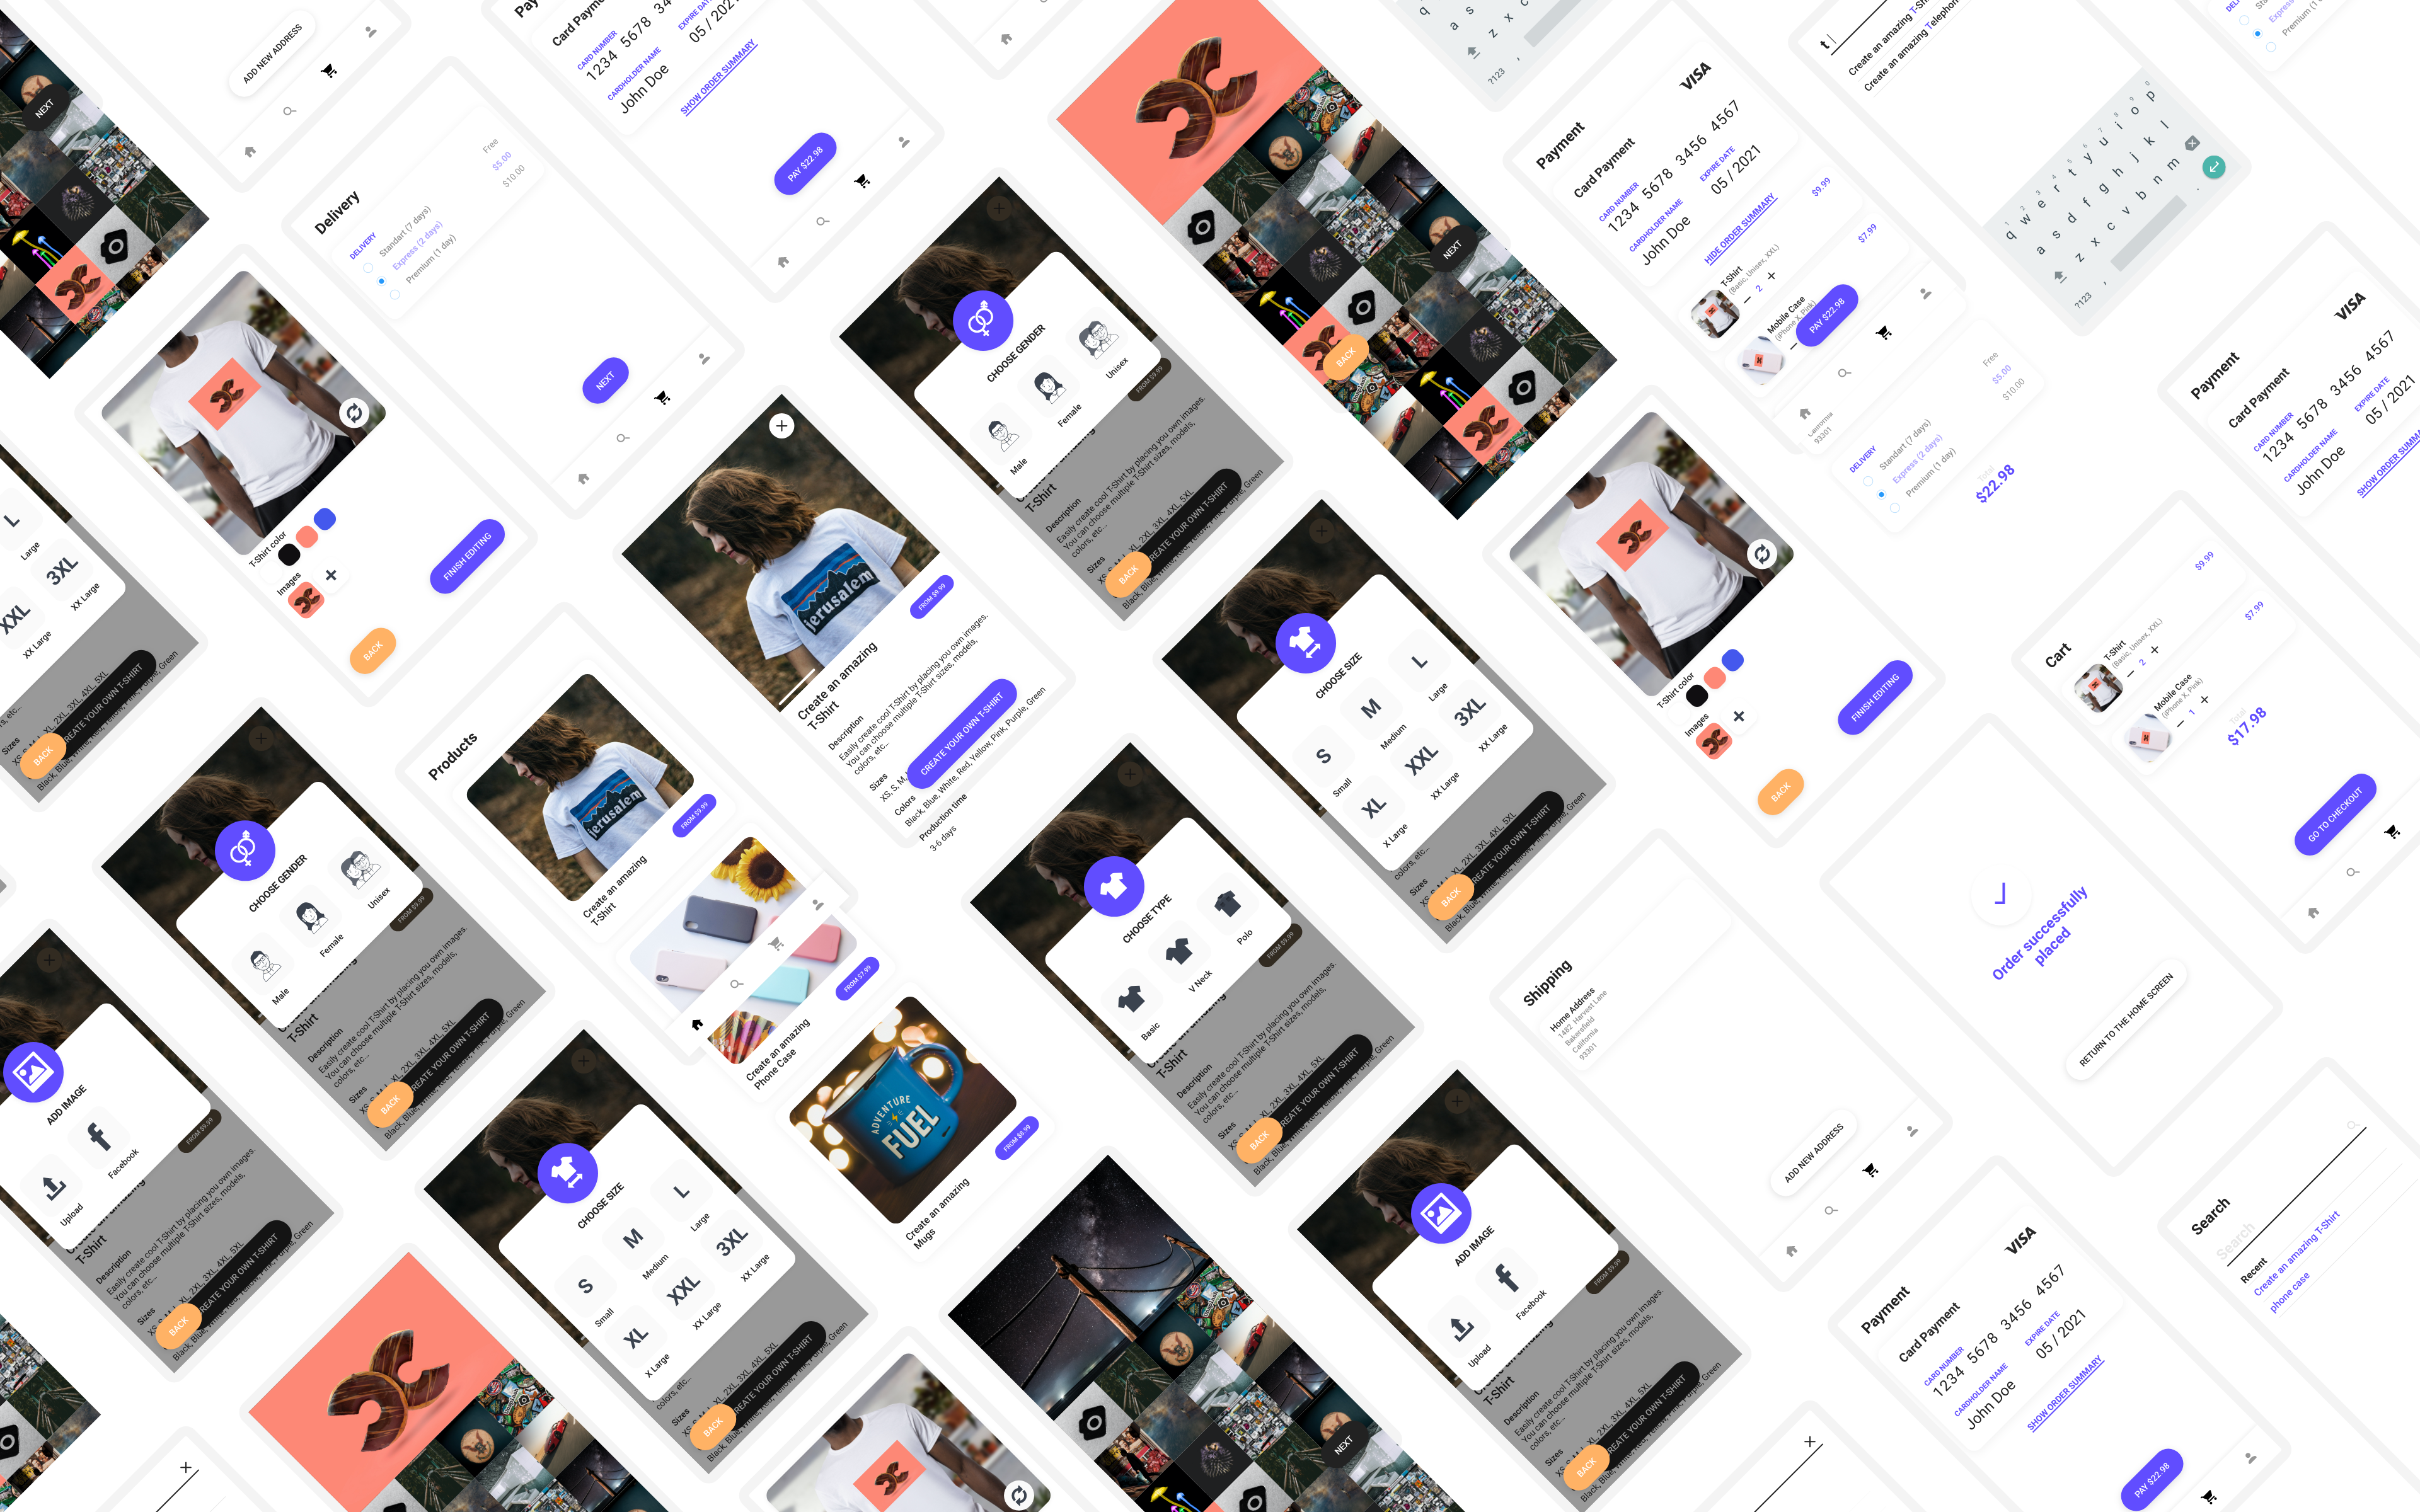 Thumbnail of Print That, UX/UI Design for an App